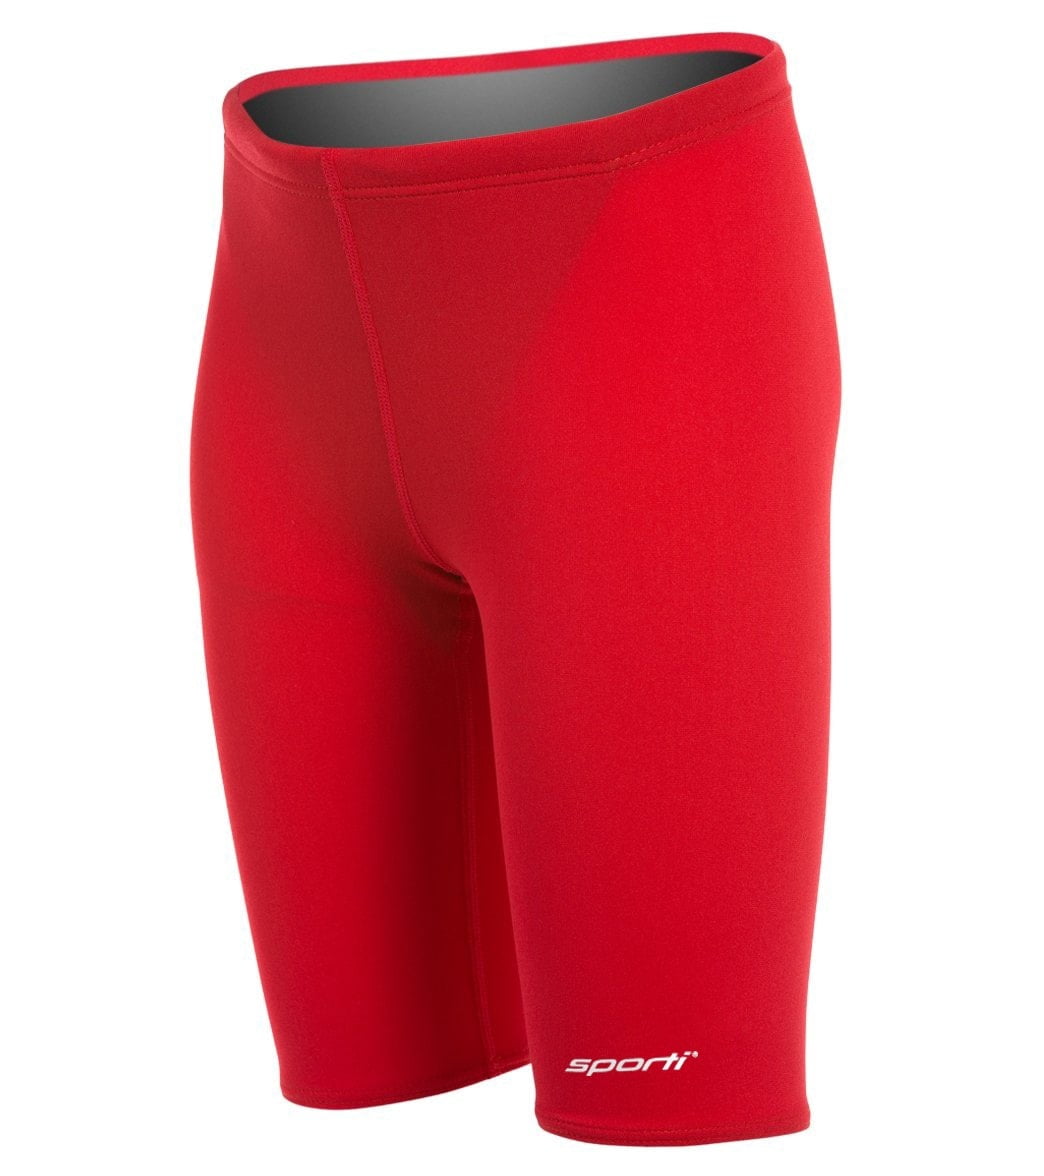 Sporti Poly Pro Solid Jammer Swimsuit Youth 22-28 (28Y, Red) - Walmart.com